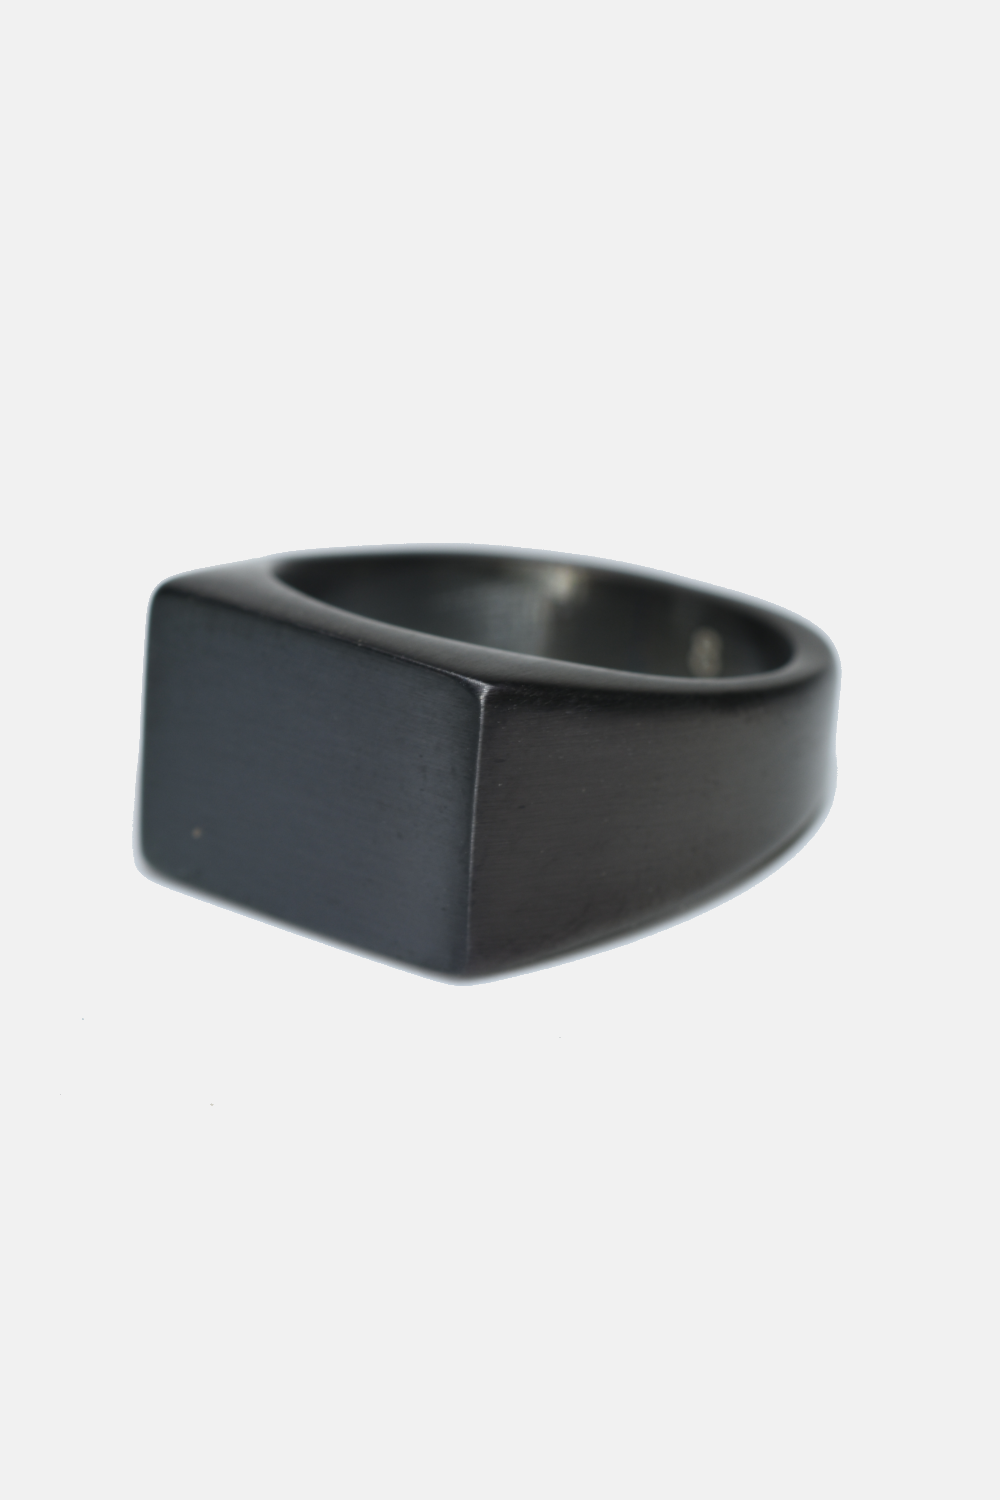 Curated Basics - Flat Top Ring: Black Steel / 8